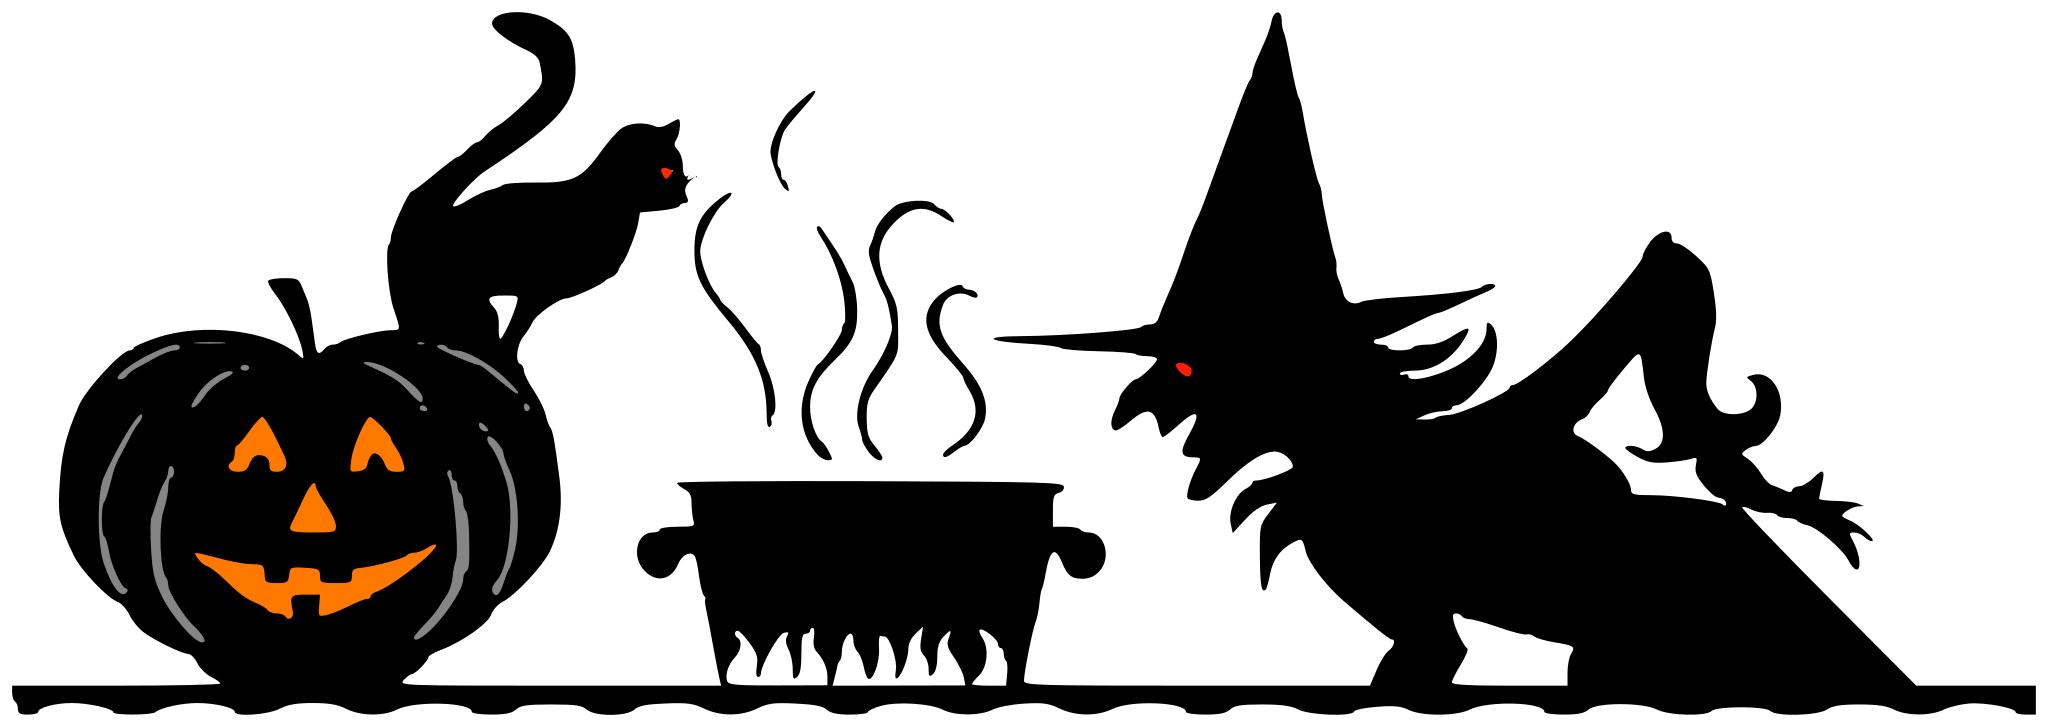 Free Images - witch brew svg.